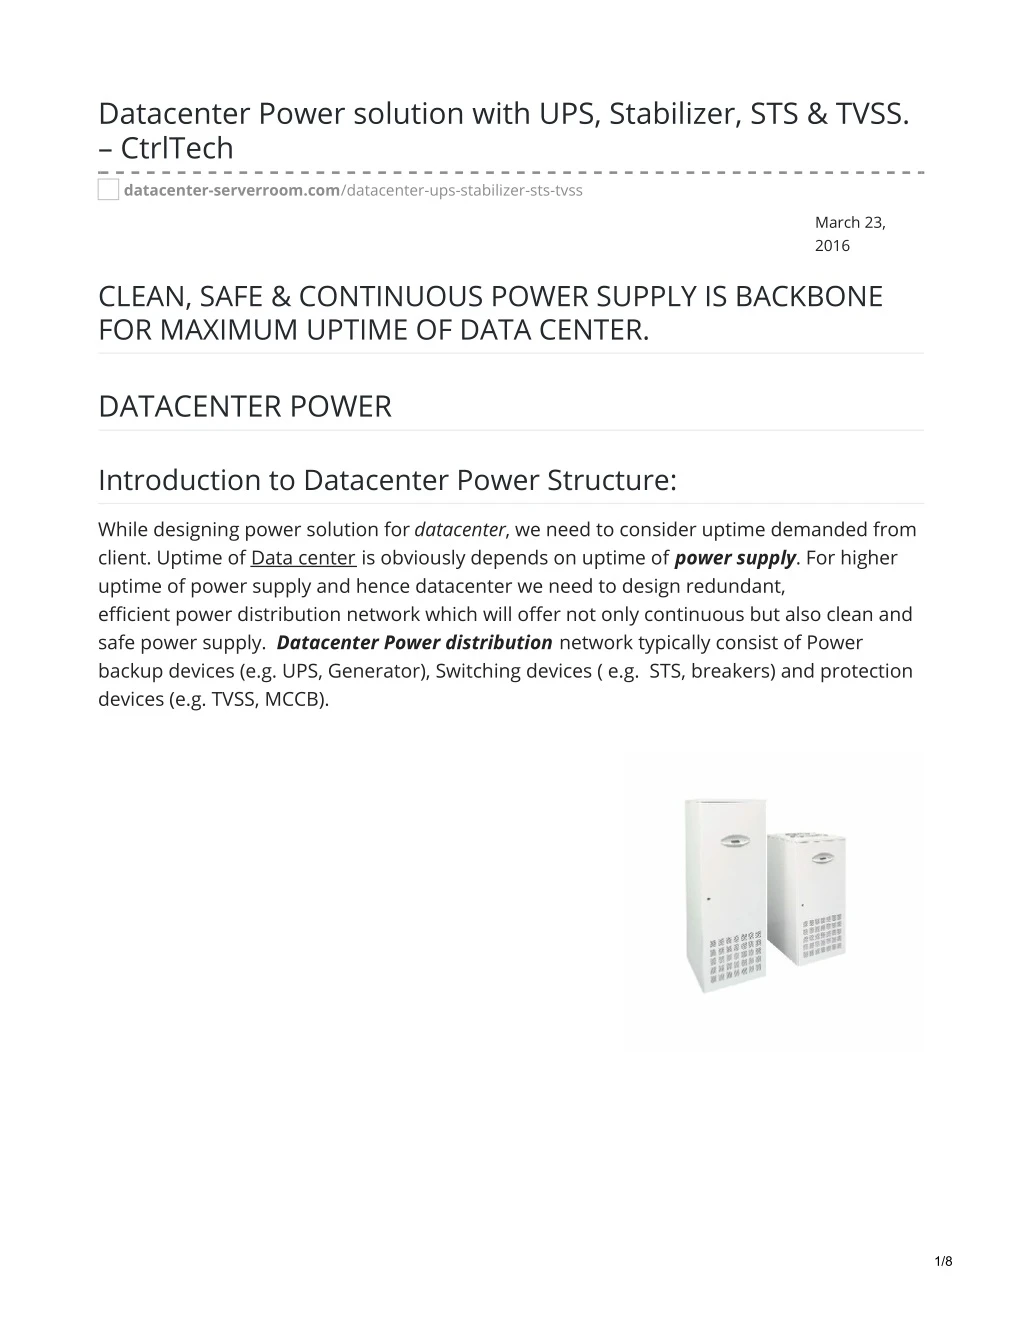 datacenter power solution with ups stabilizer